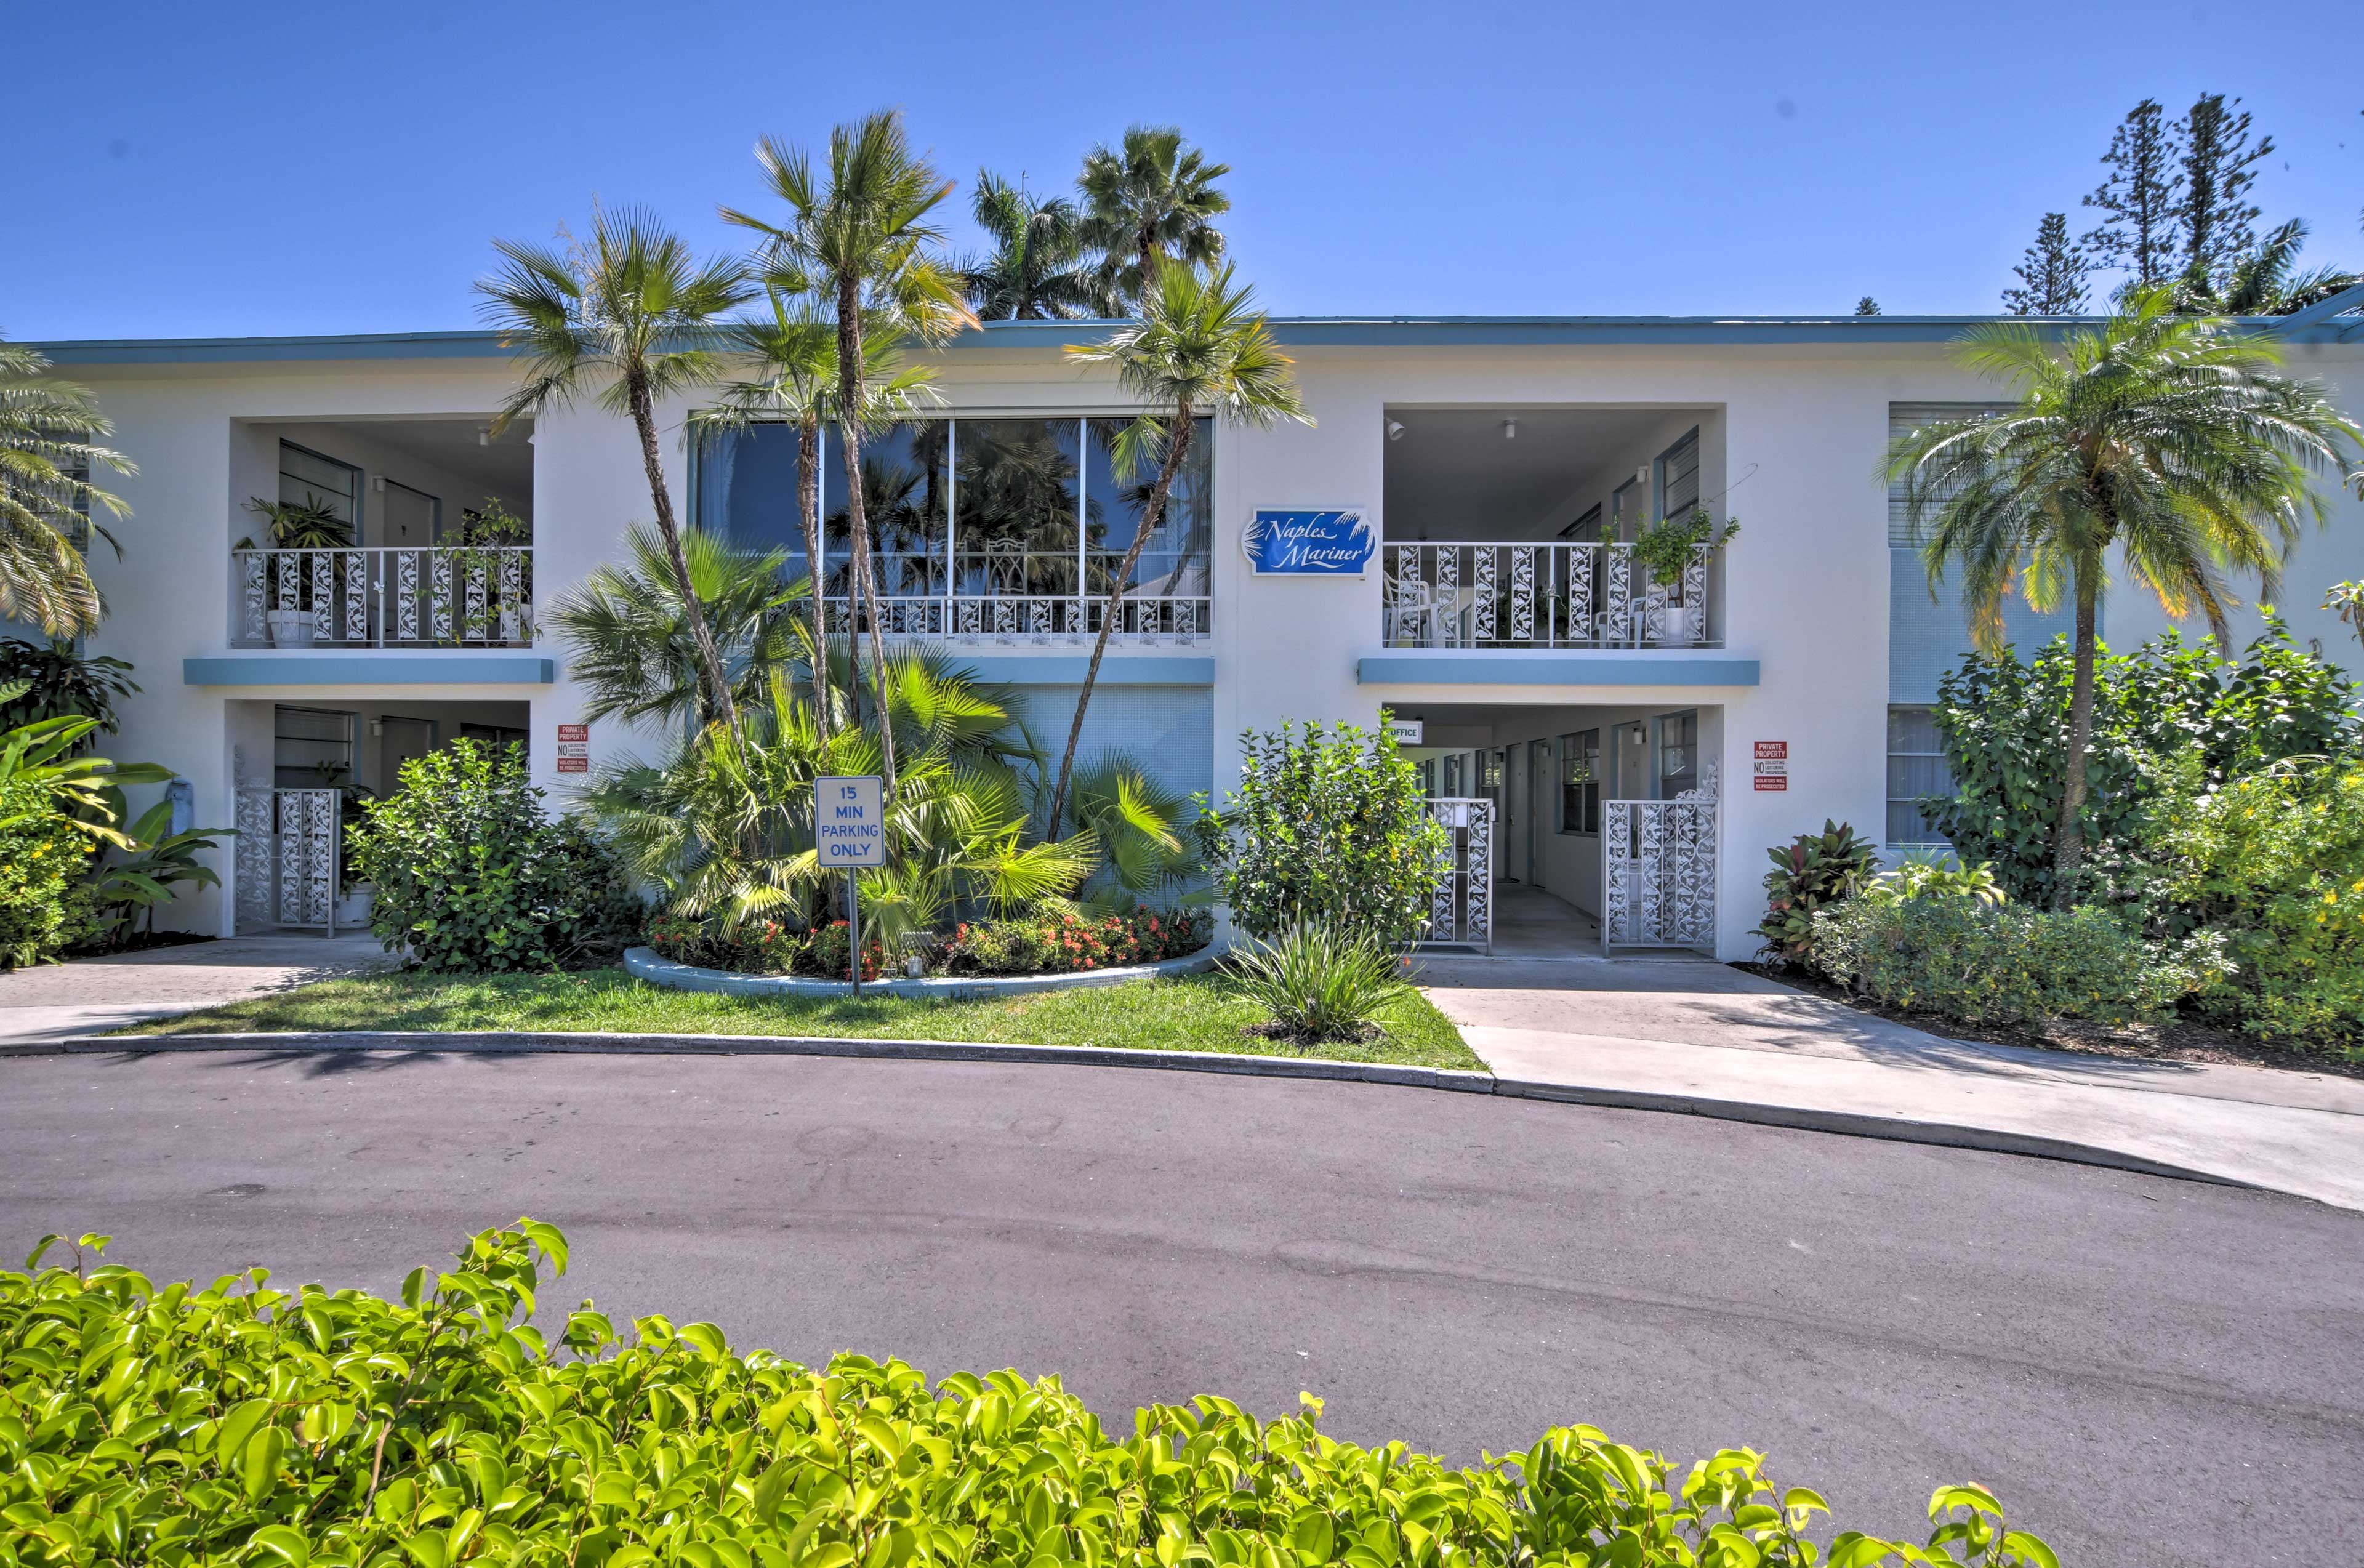 This vacation rental is situated in the Naples Mariner community.